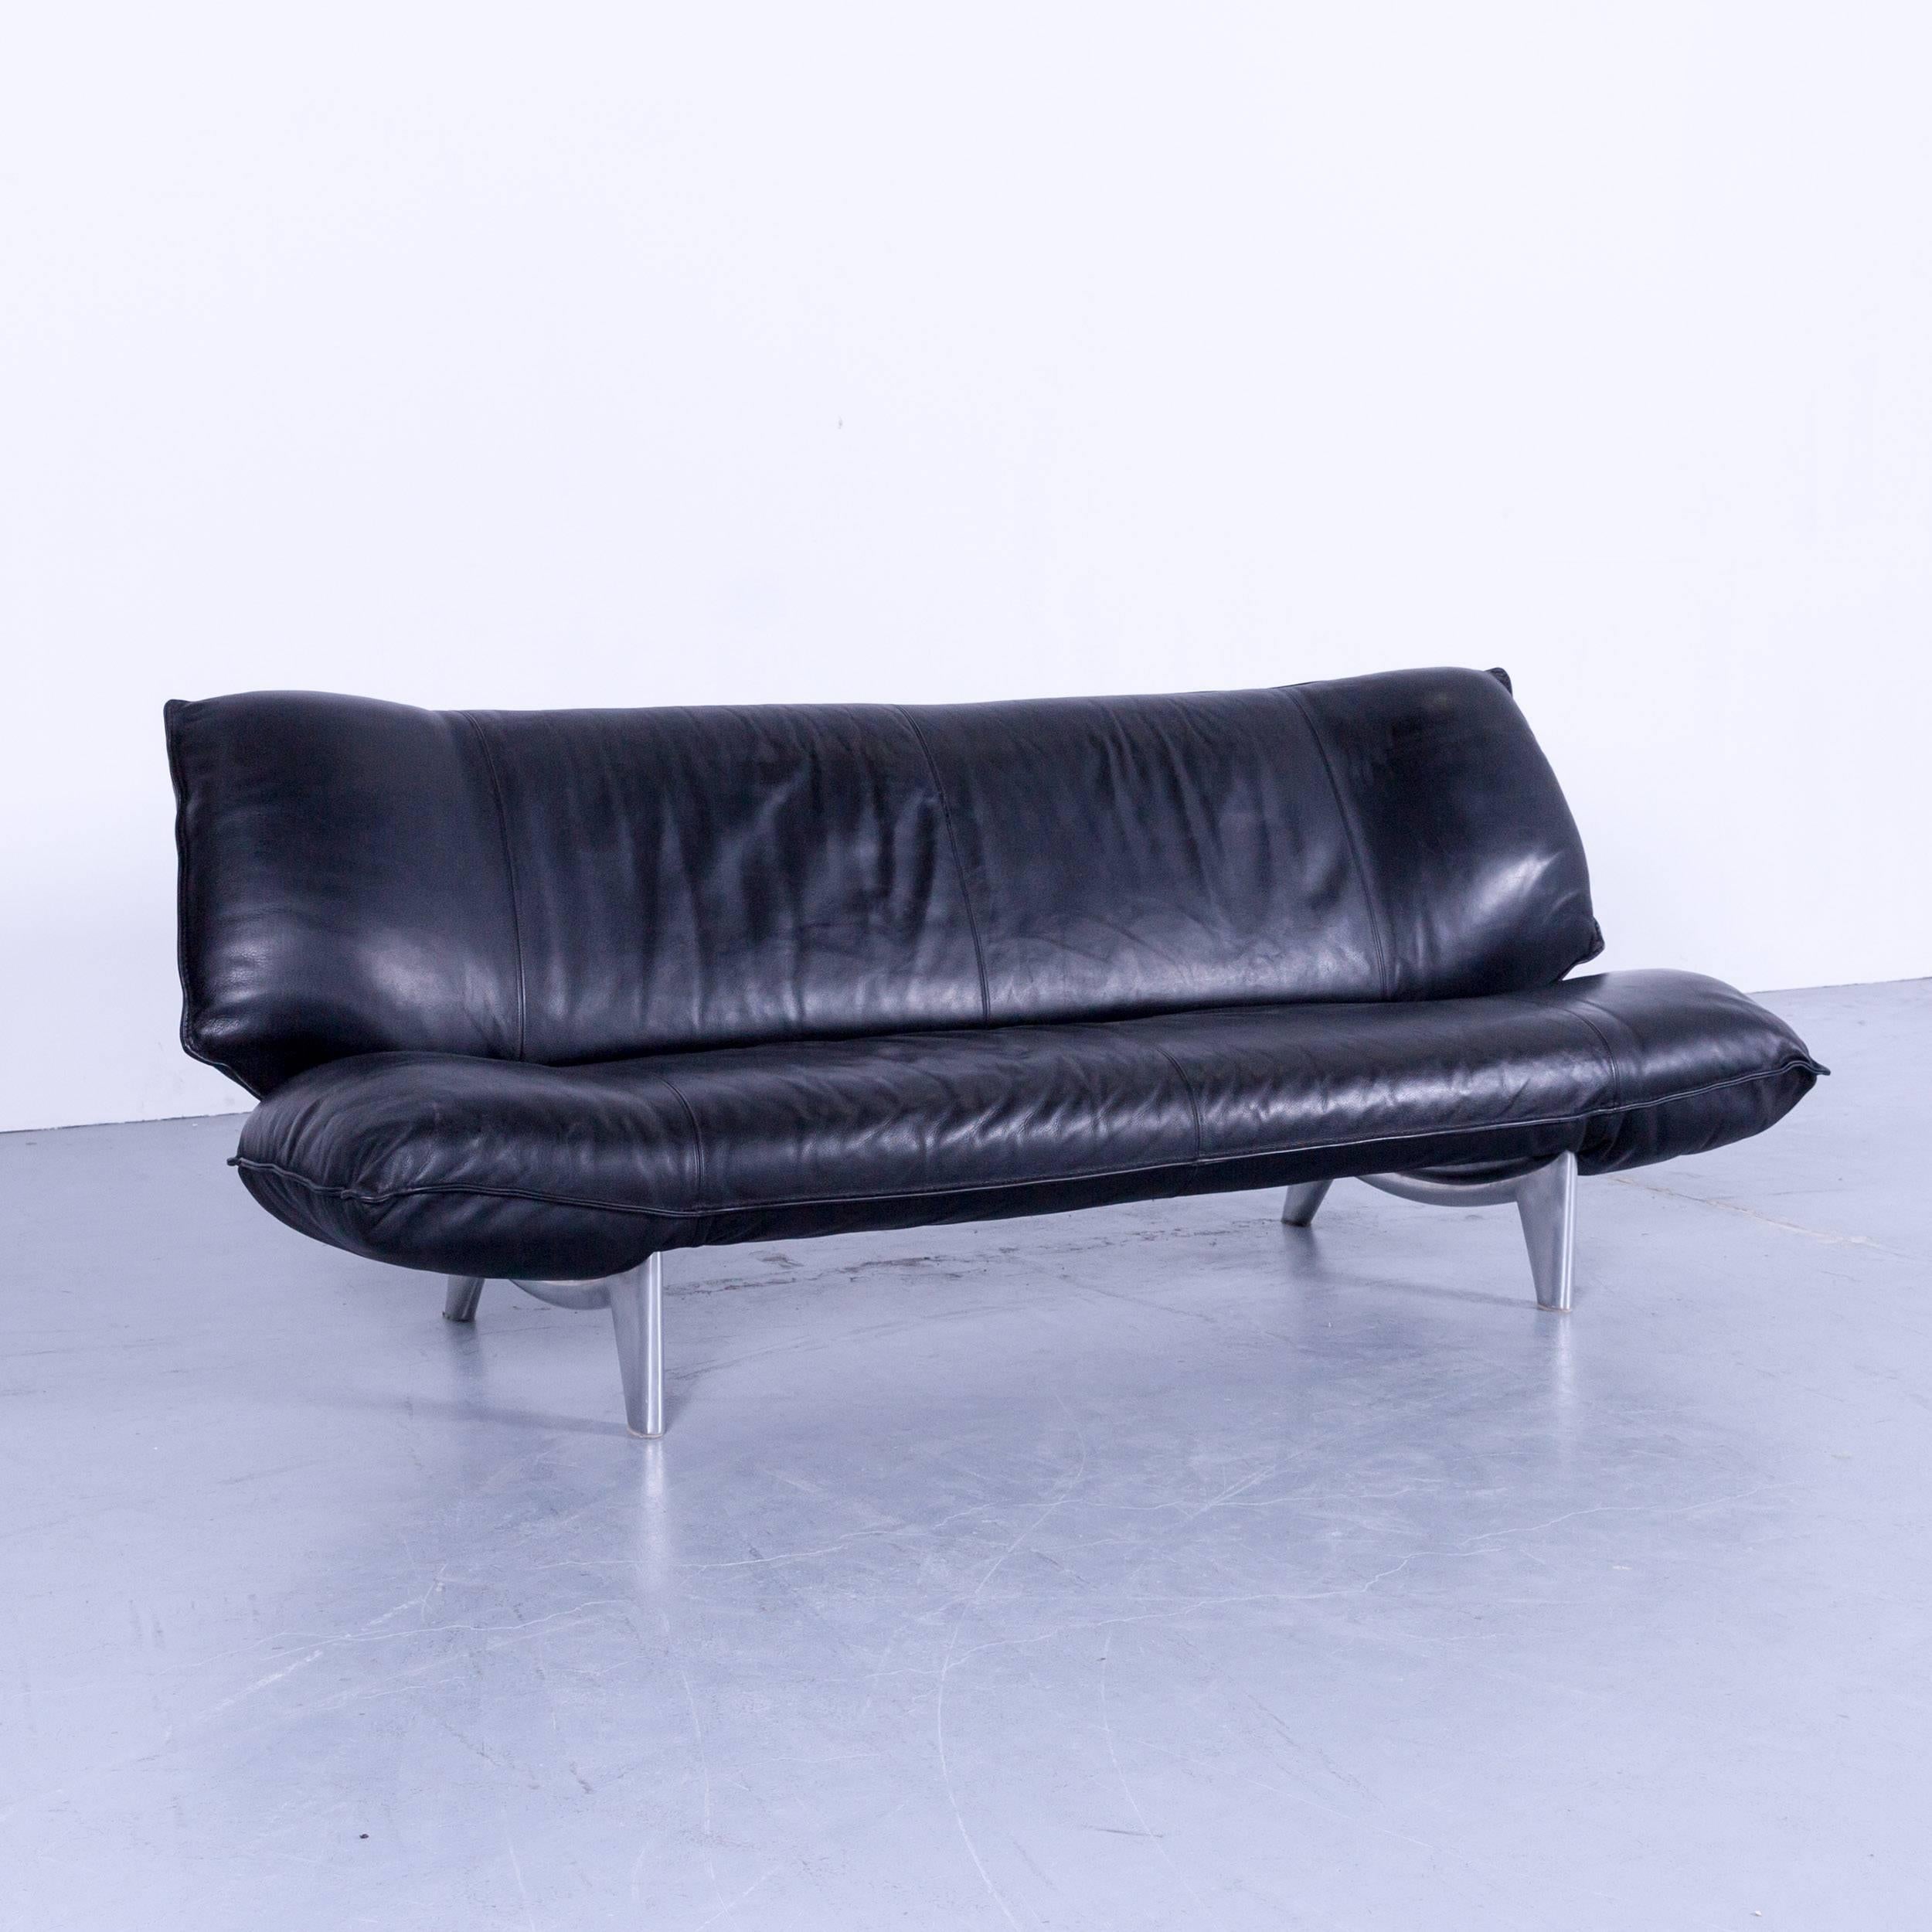 Leolux Tango designer leather sofa black three-seat couch function metal, with convenient functions, made for pure comfort and flexibility.